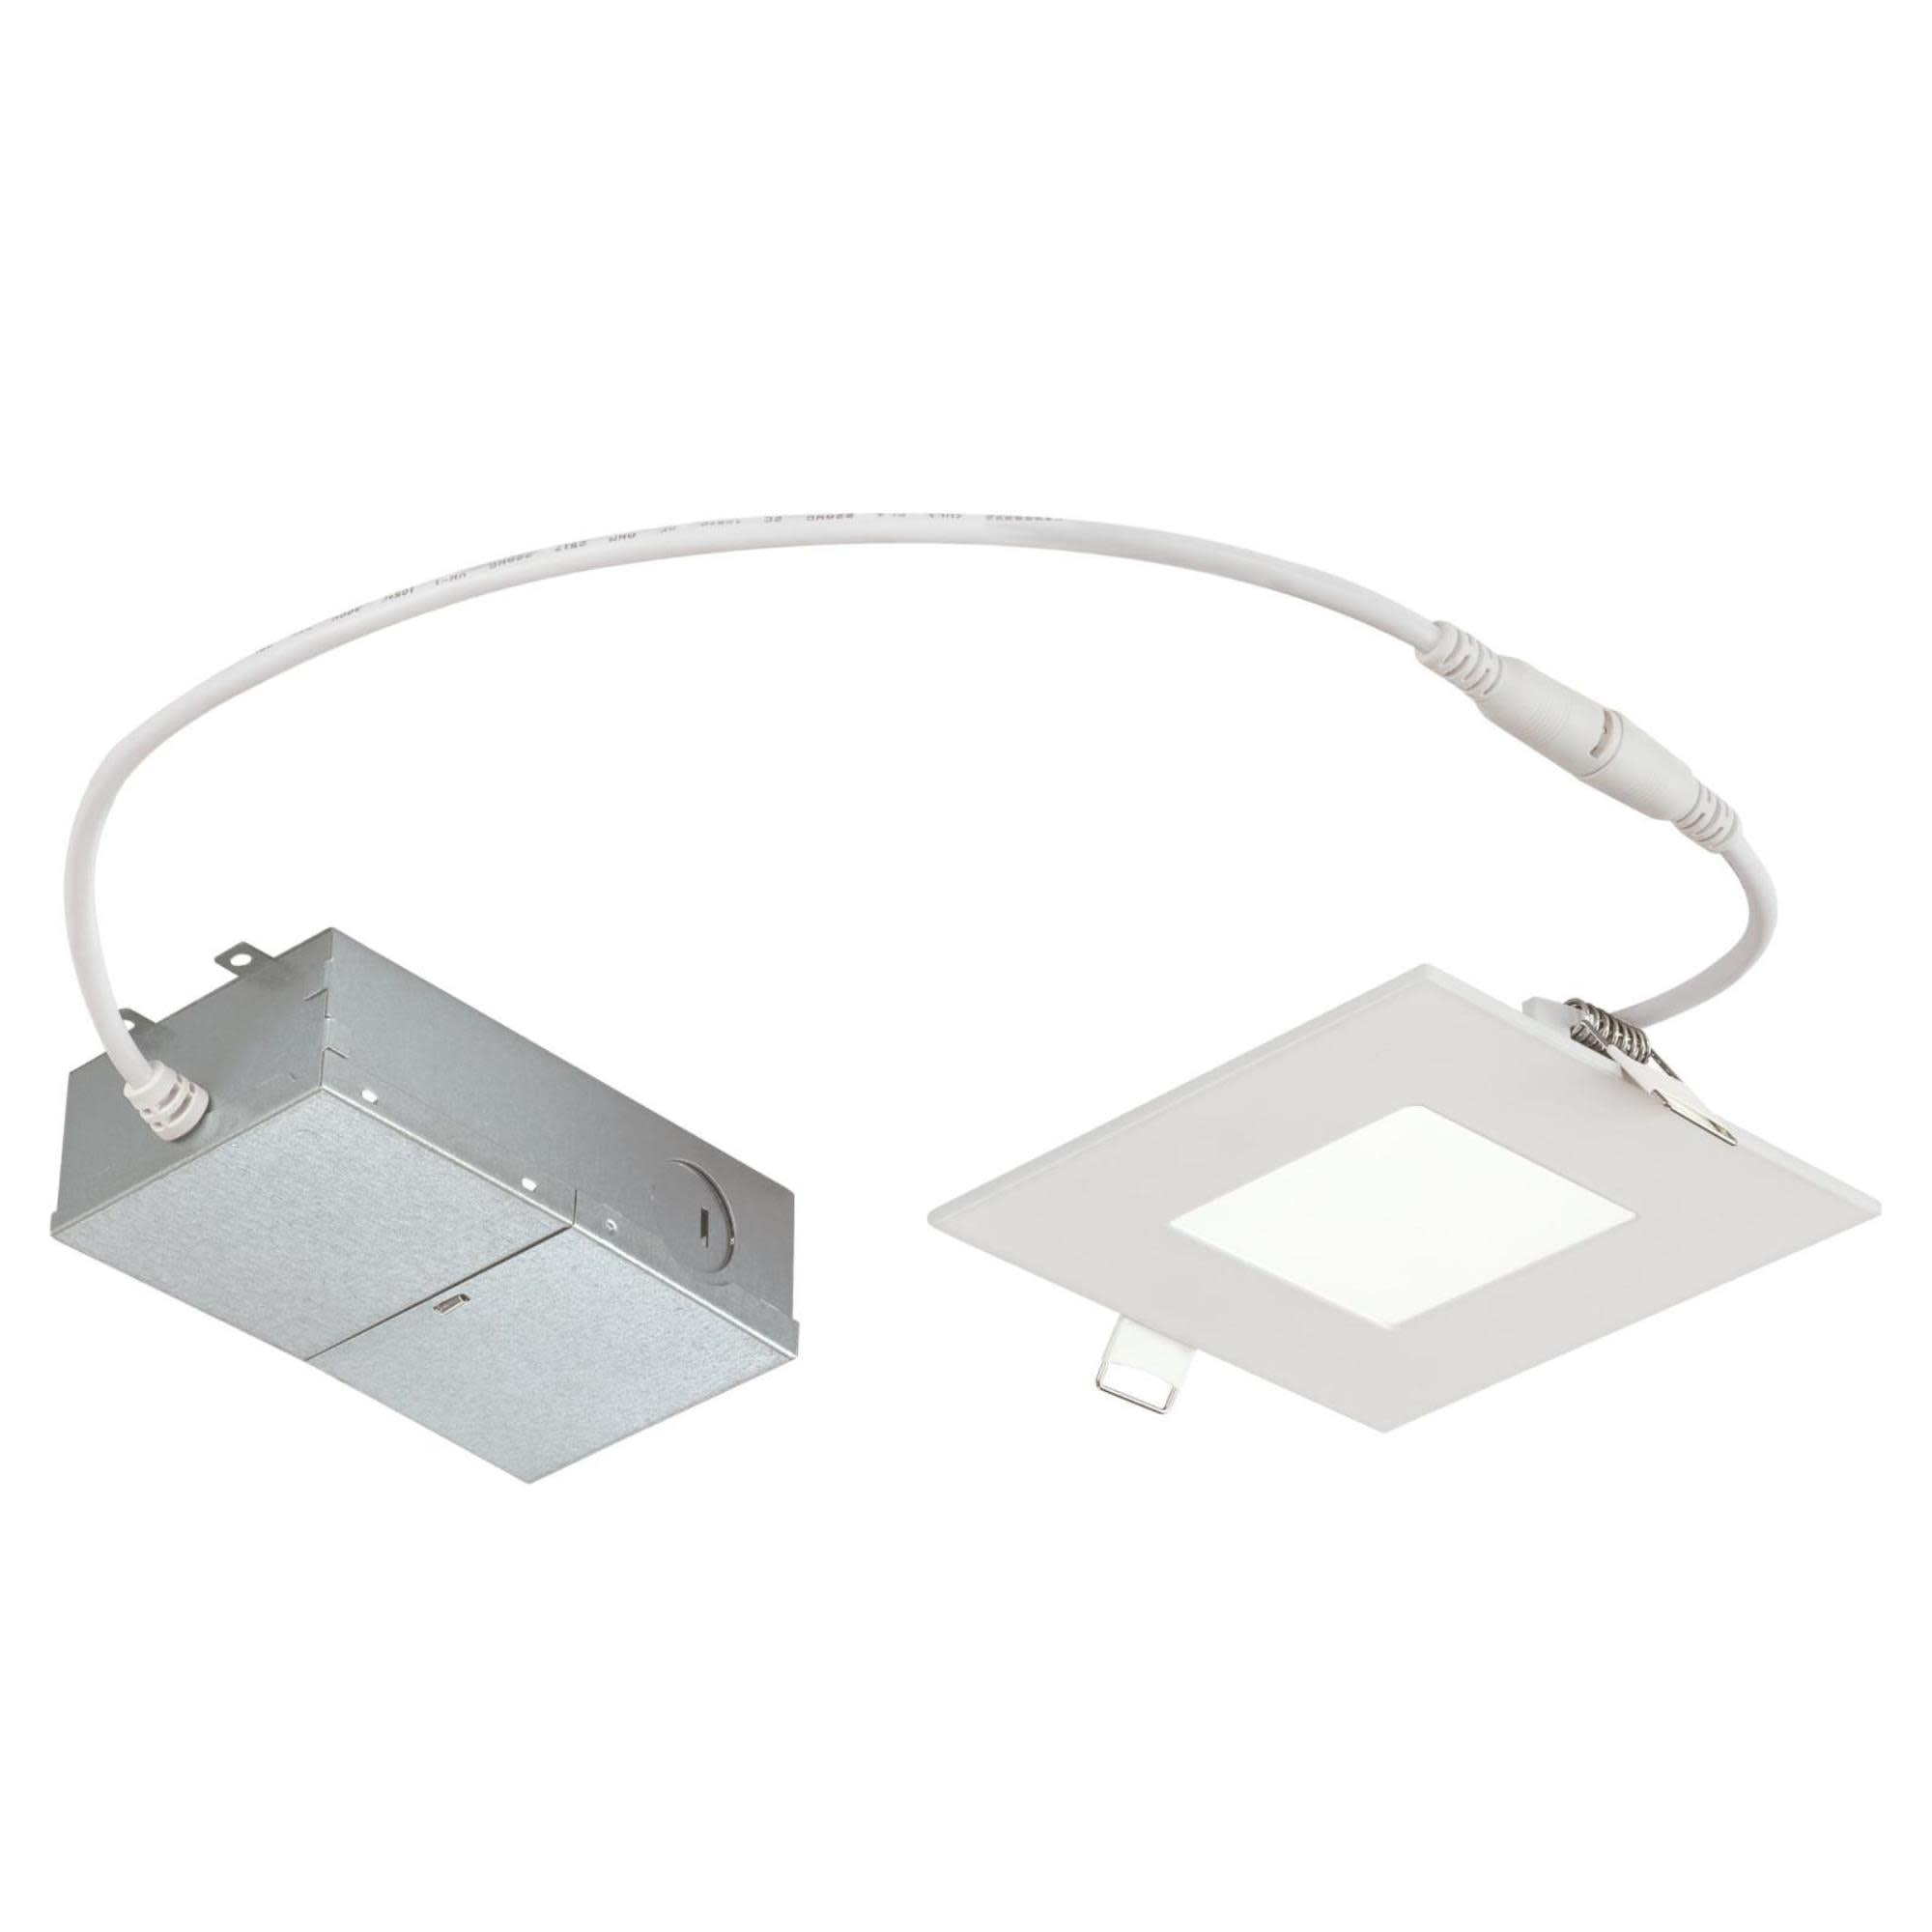 10W Slim Square Recessed LED Downlight 4" Dimmable 5000K, 120 Volt, Box